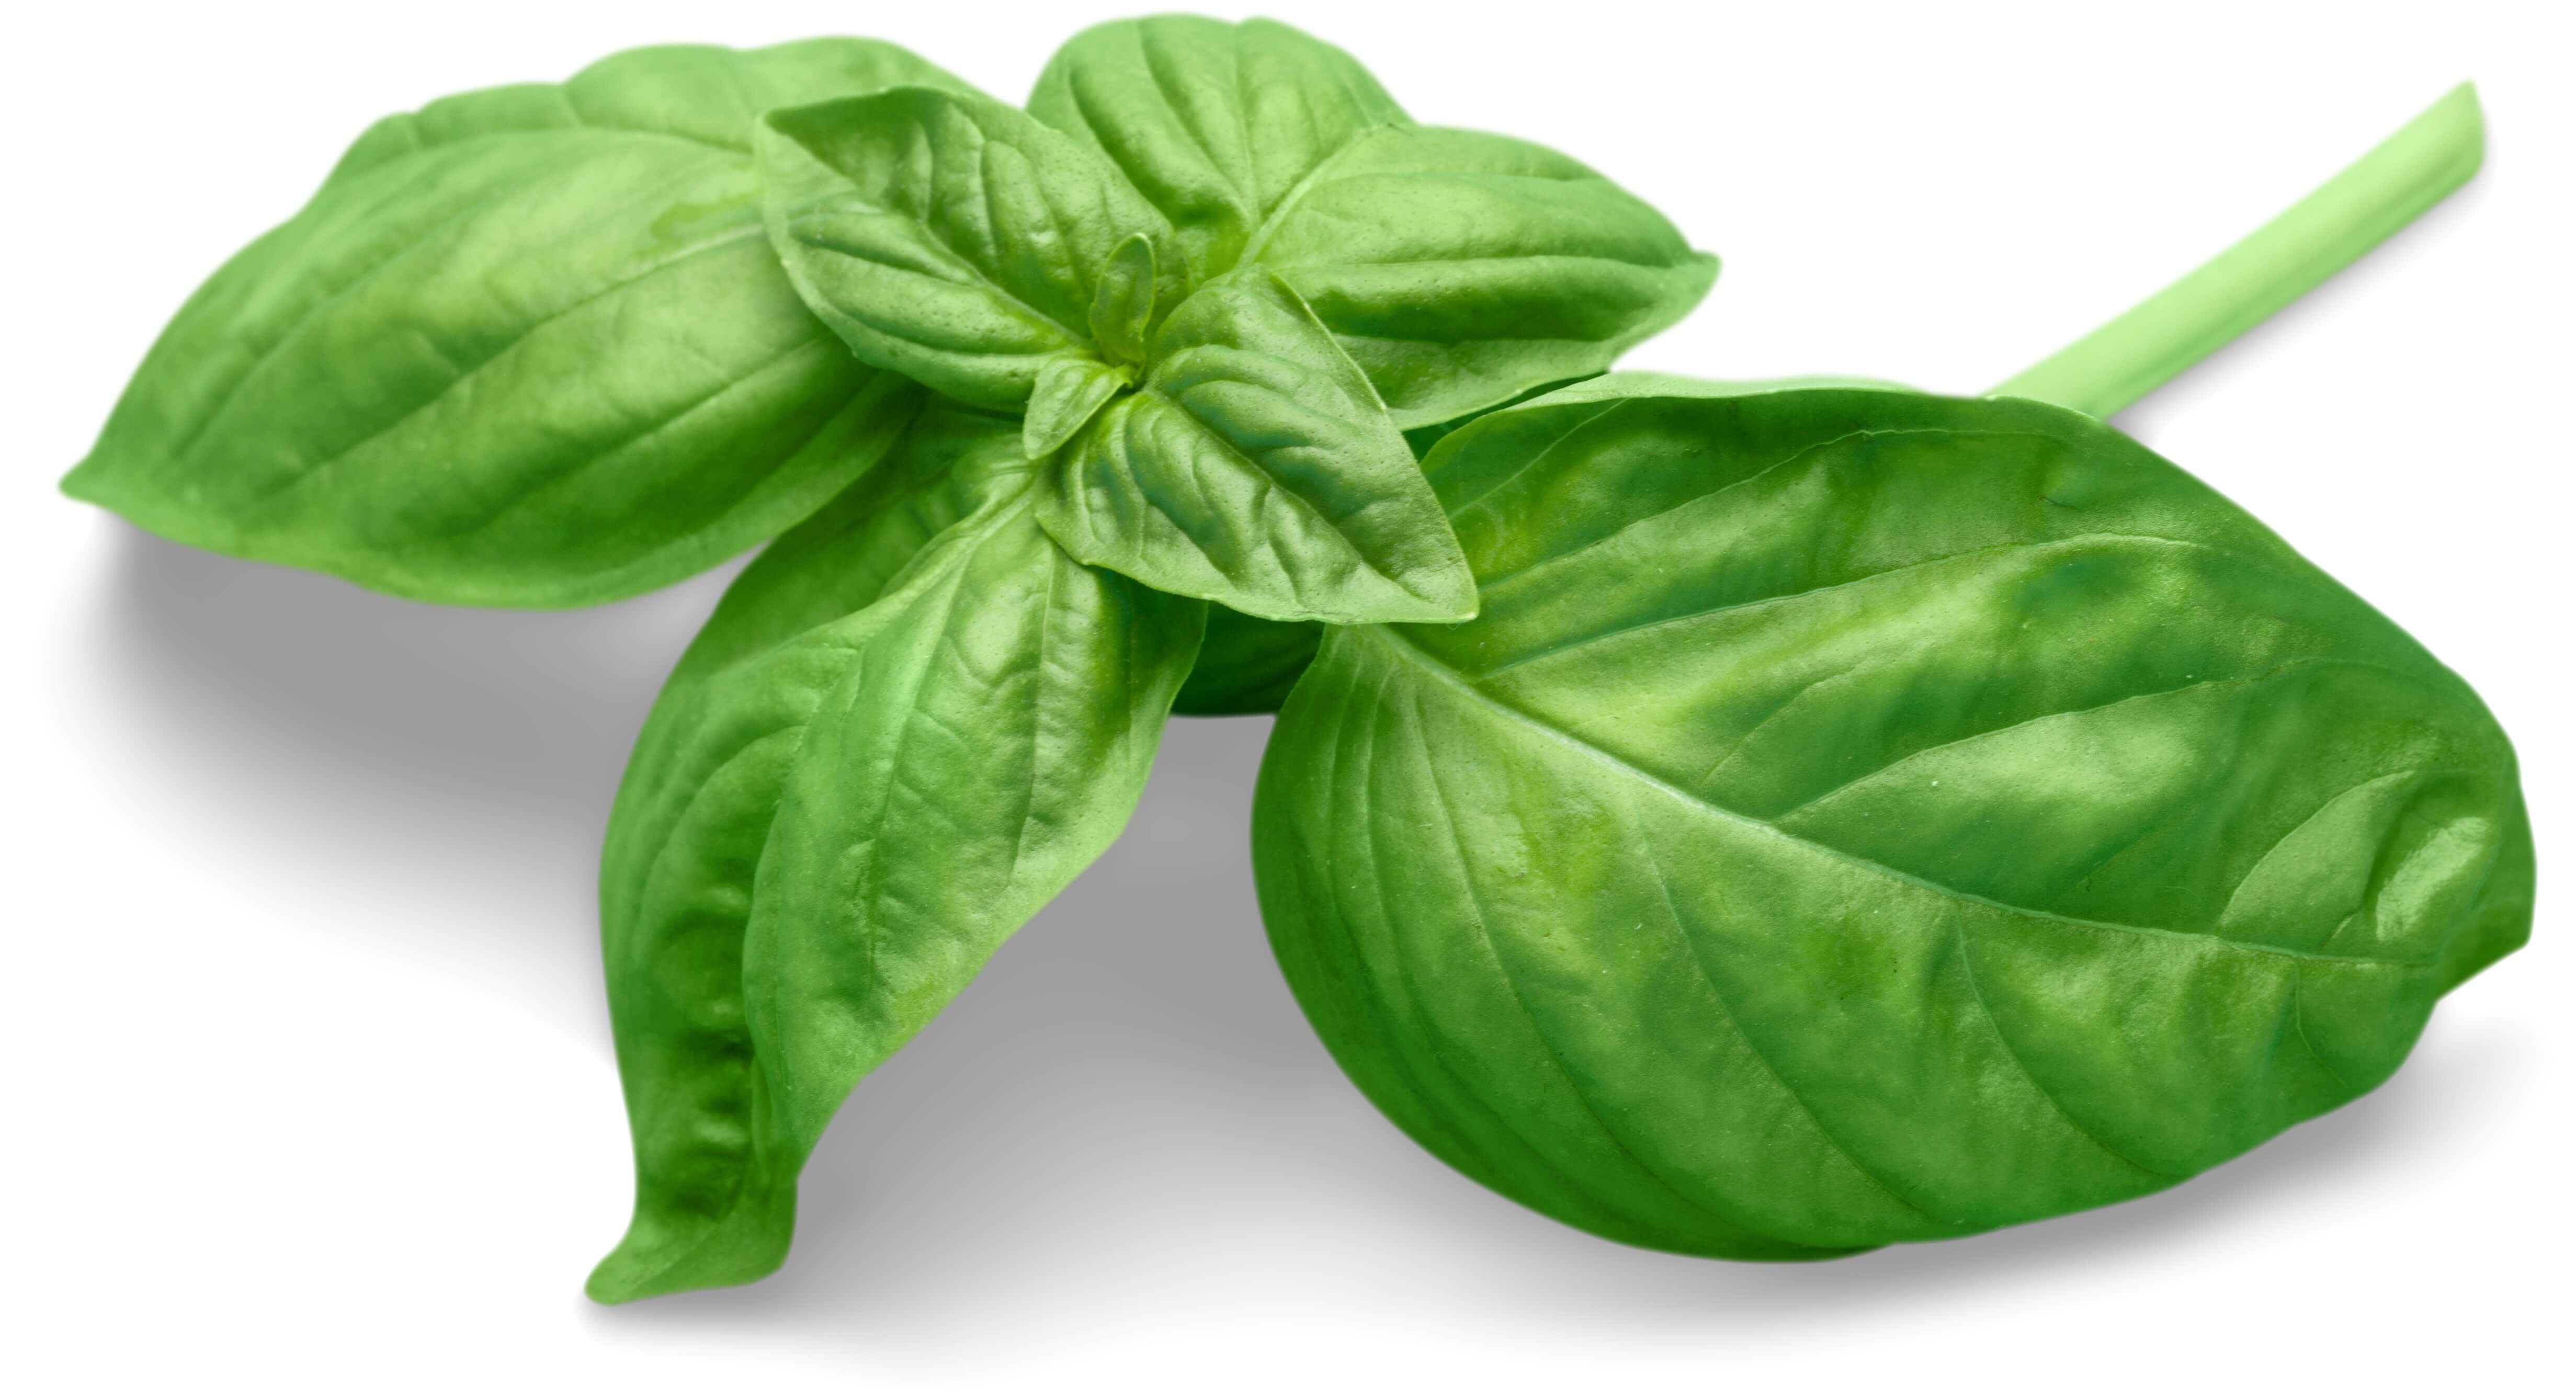 Basil is a delicious and healthy berb used in making pesto, salads, Bruschetta. Often served with tomatoes, but equally popular in egg, poultry and vegetable dishes.